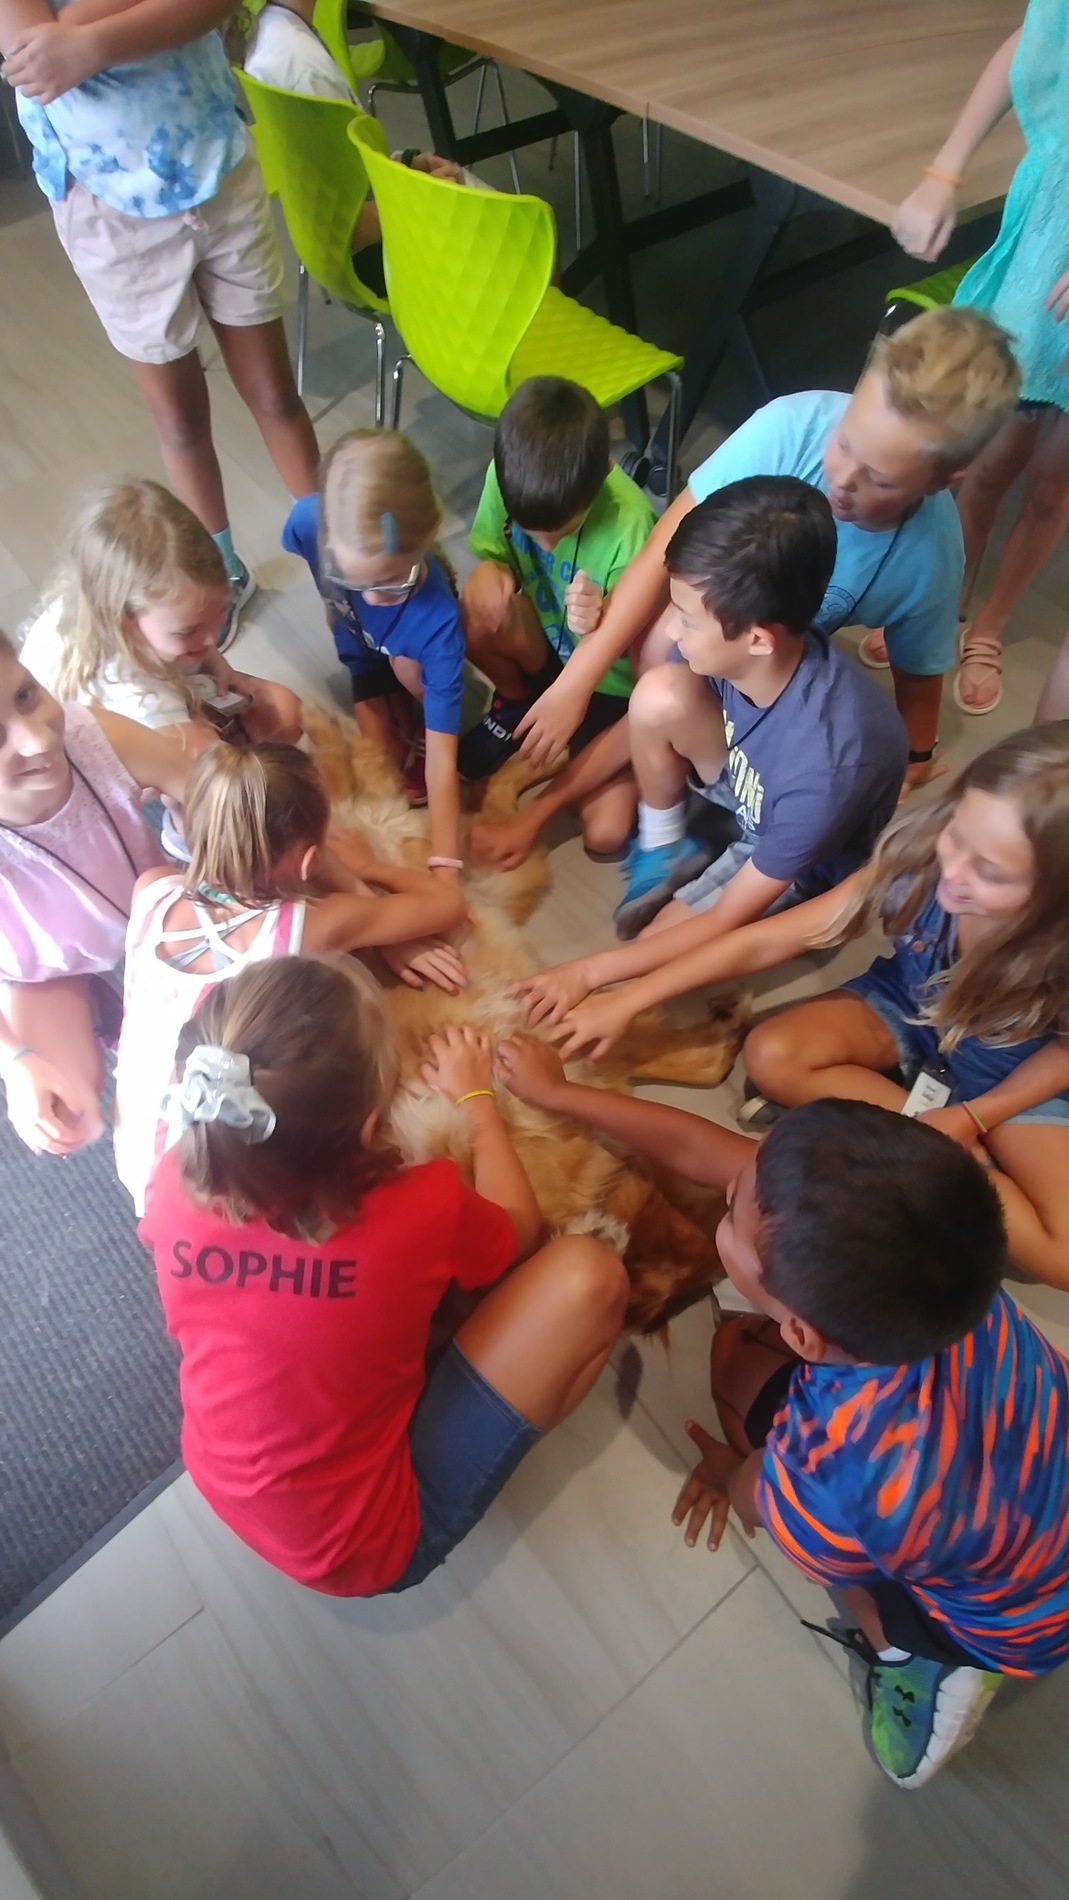 Summer Animal Camp at Halifax Humane Society featuring dogs, cats